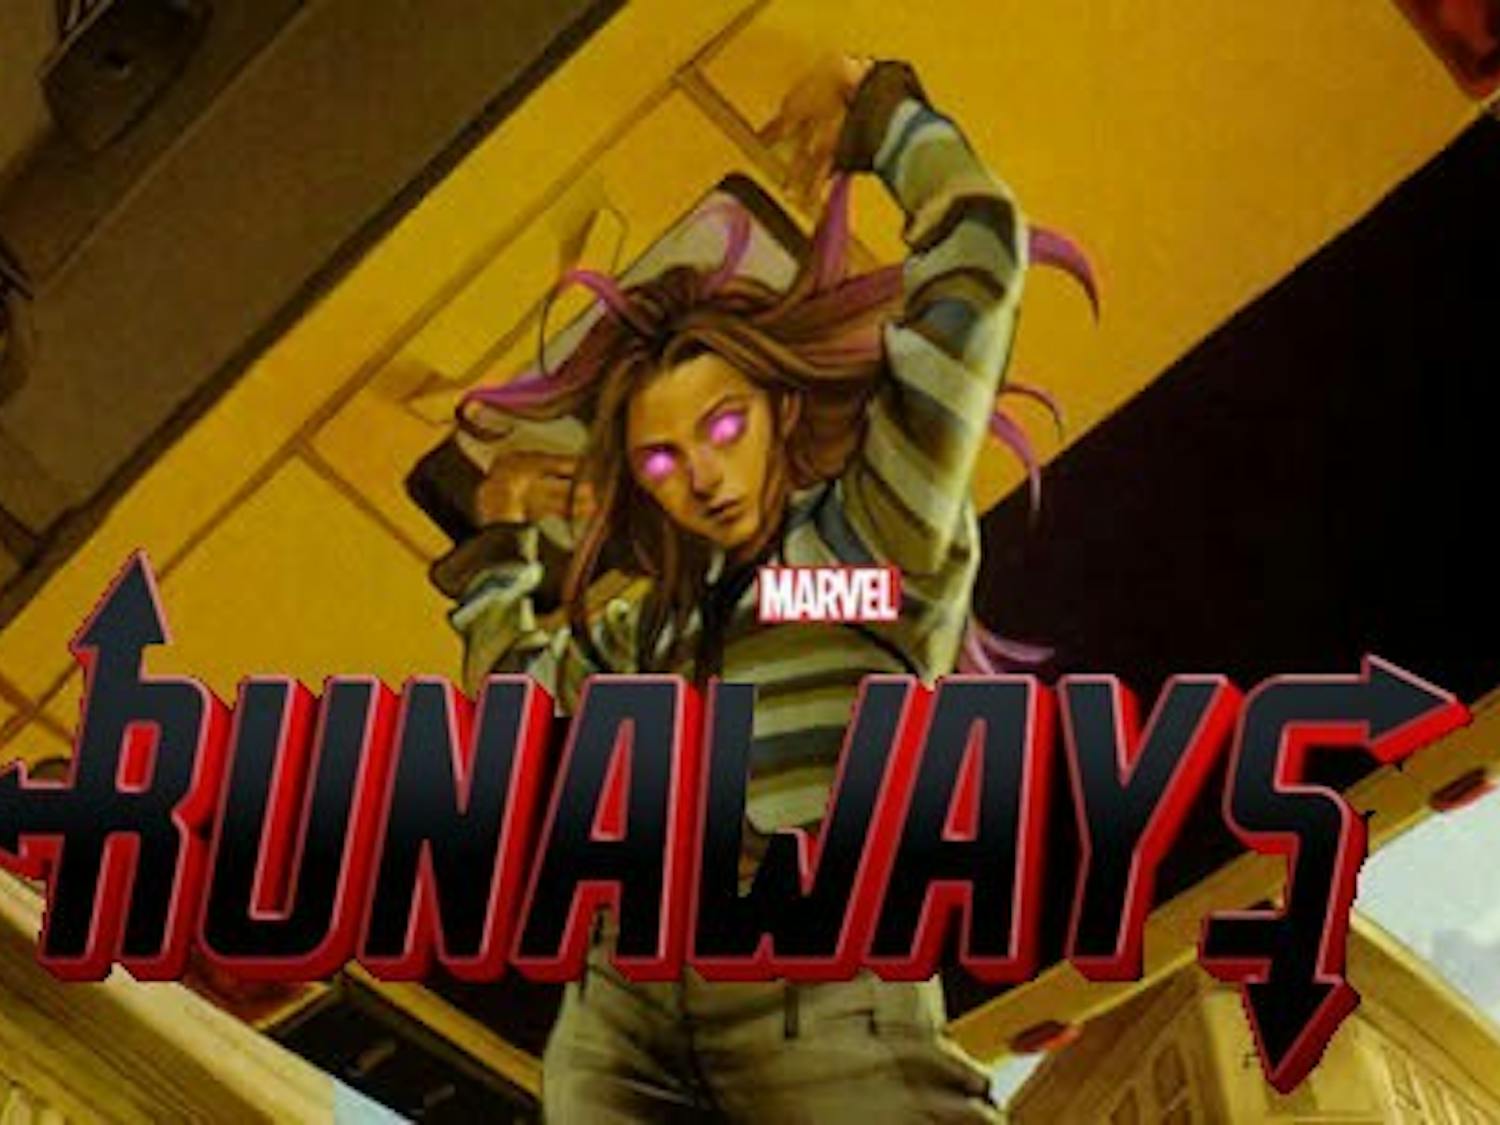 "Runaways" incorporates the theme and commonly used trope&nbsp;of being an outcast.